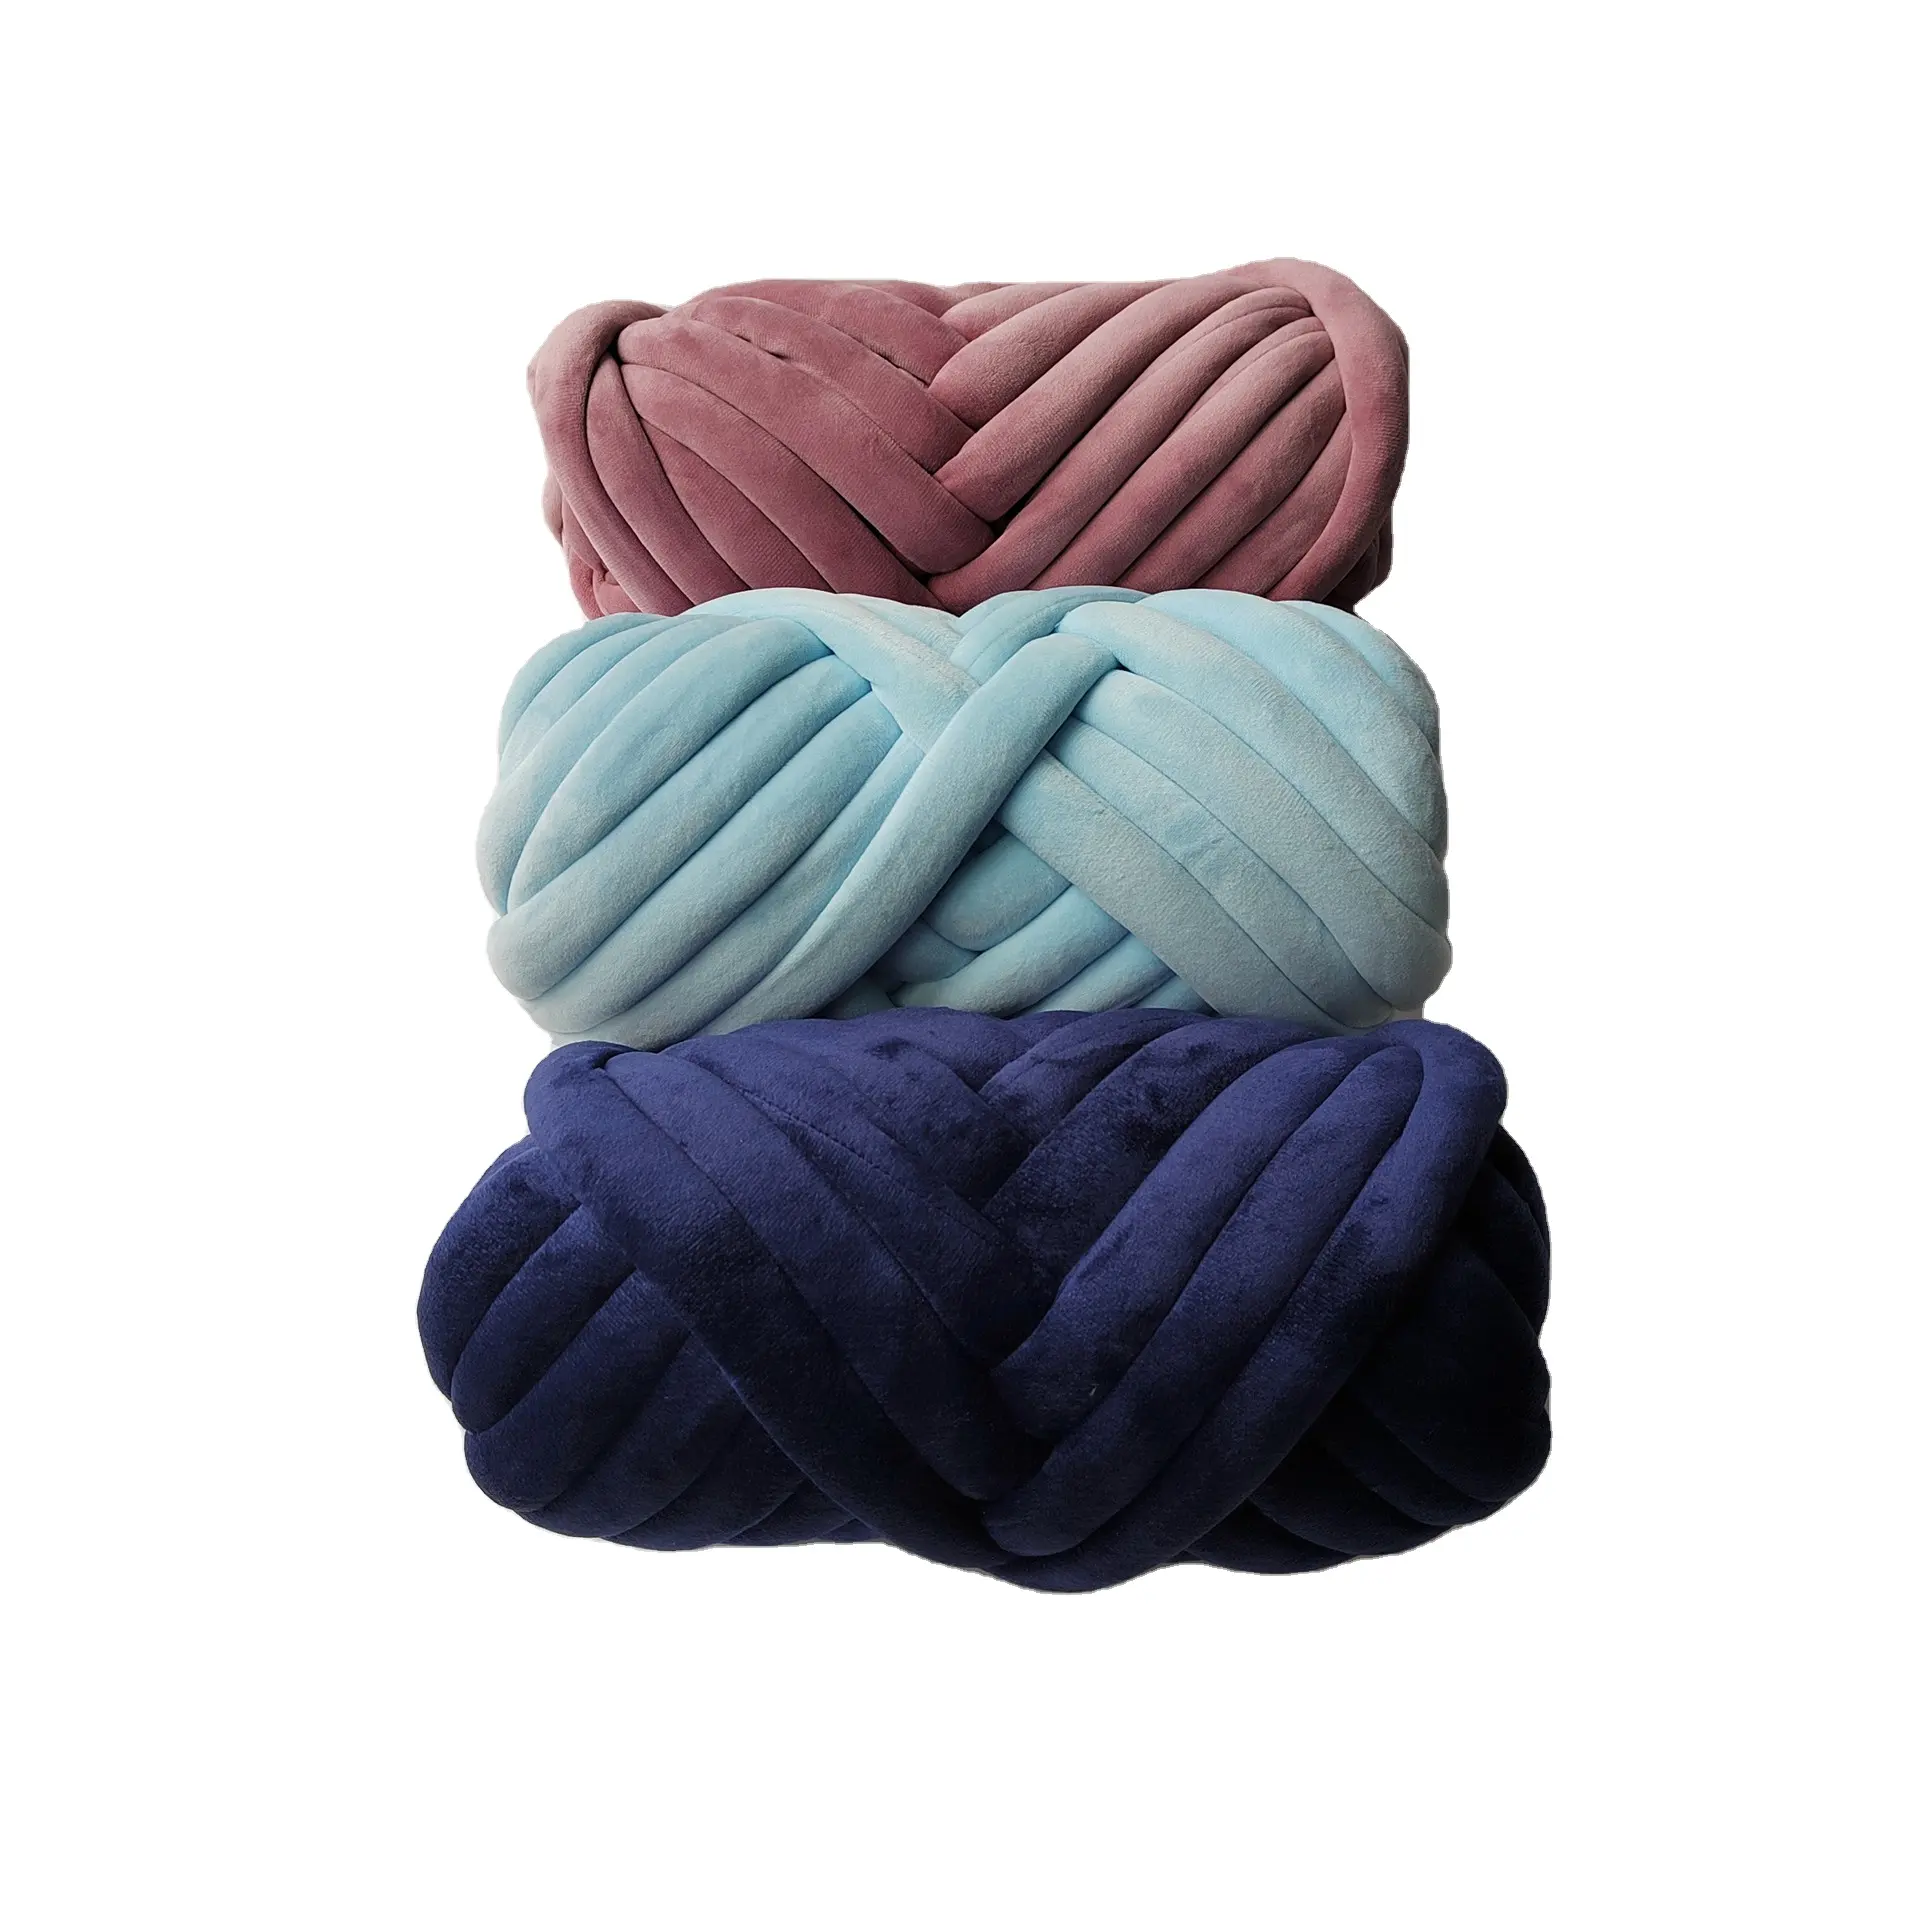 Arm Knitting Yarn for Chunky Braided Knot Throw Blanket DIY, Soft Extra Cotton Washable Tube Bulky Giant Yarn for Weave Craft